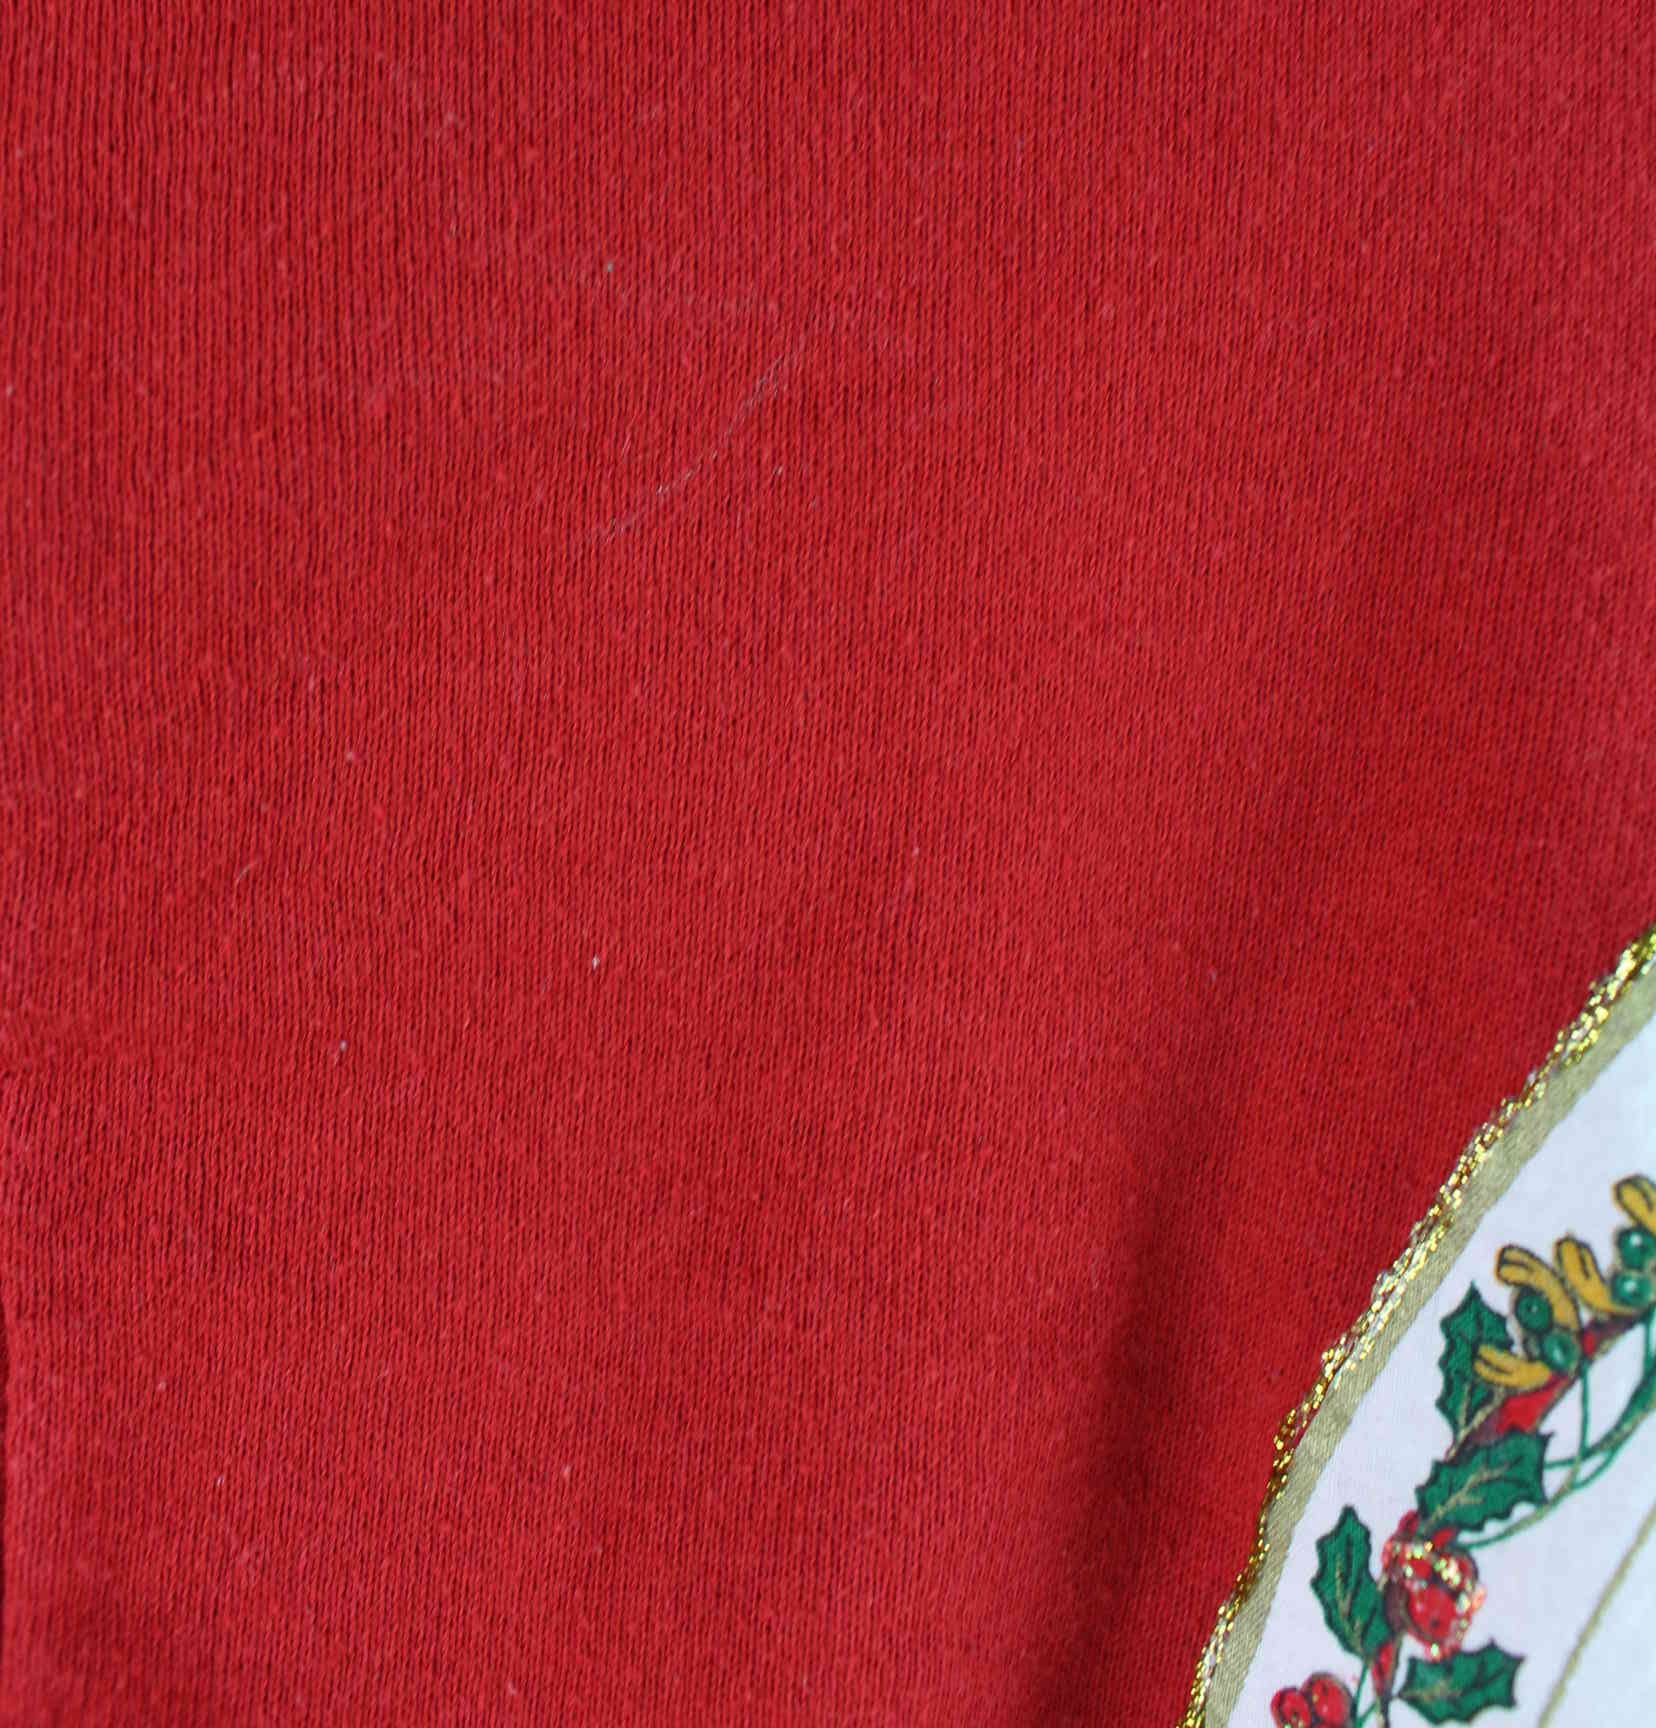 Jerzees 90s Vintage Santa Embroidered Sweater Rot L (detail image 3)